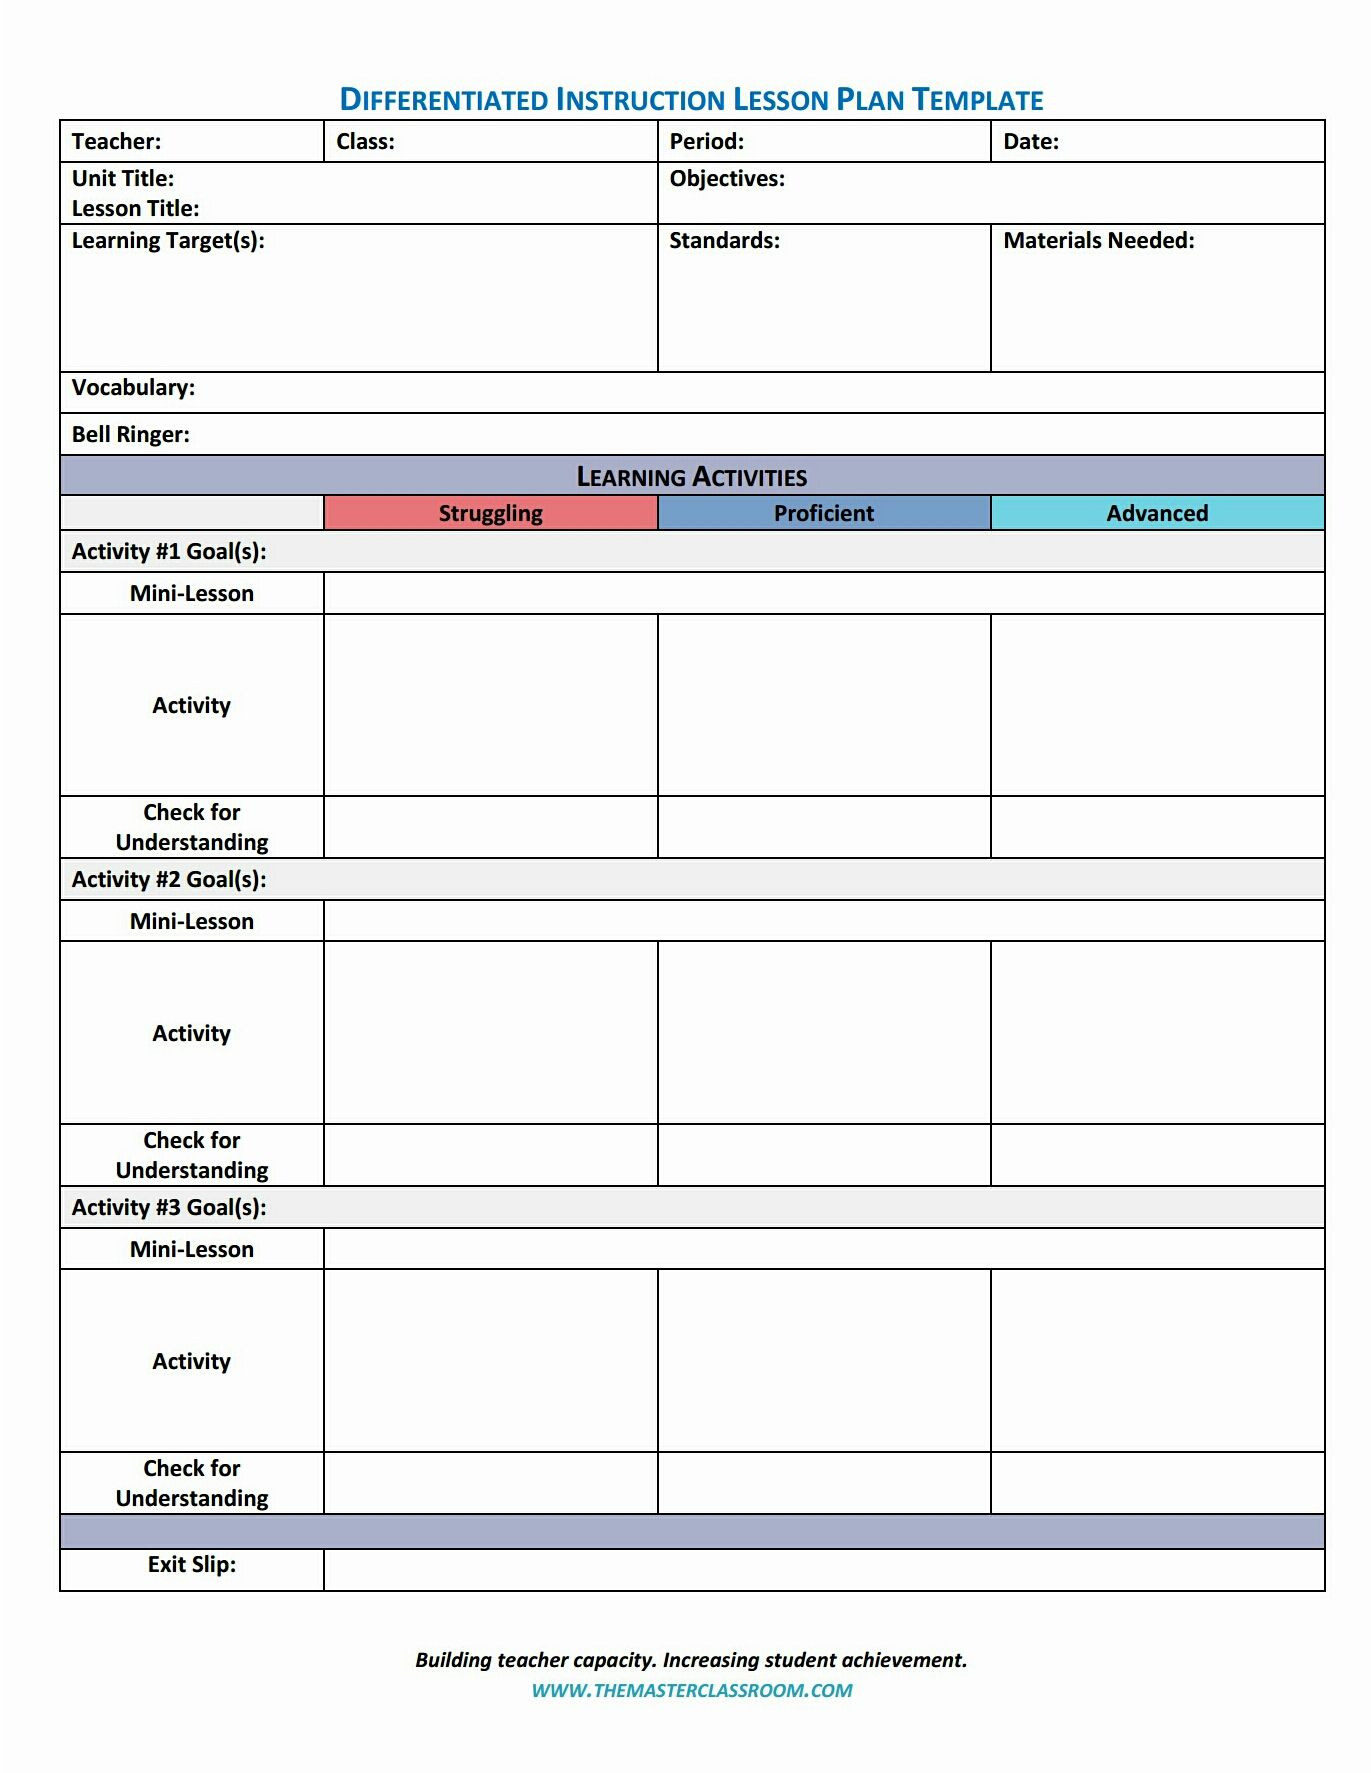 Differentiated Lesson Plan Instruction Lesson Plan Template